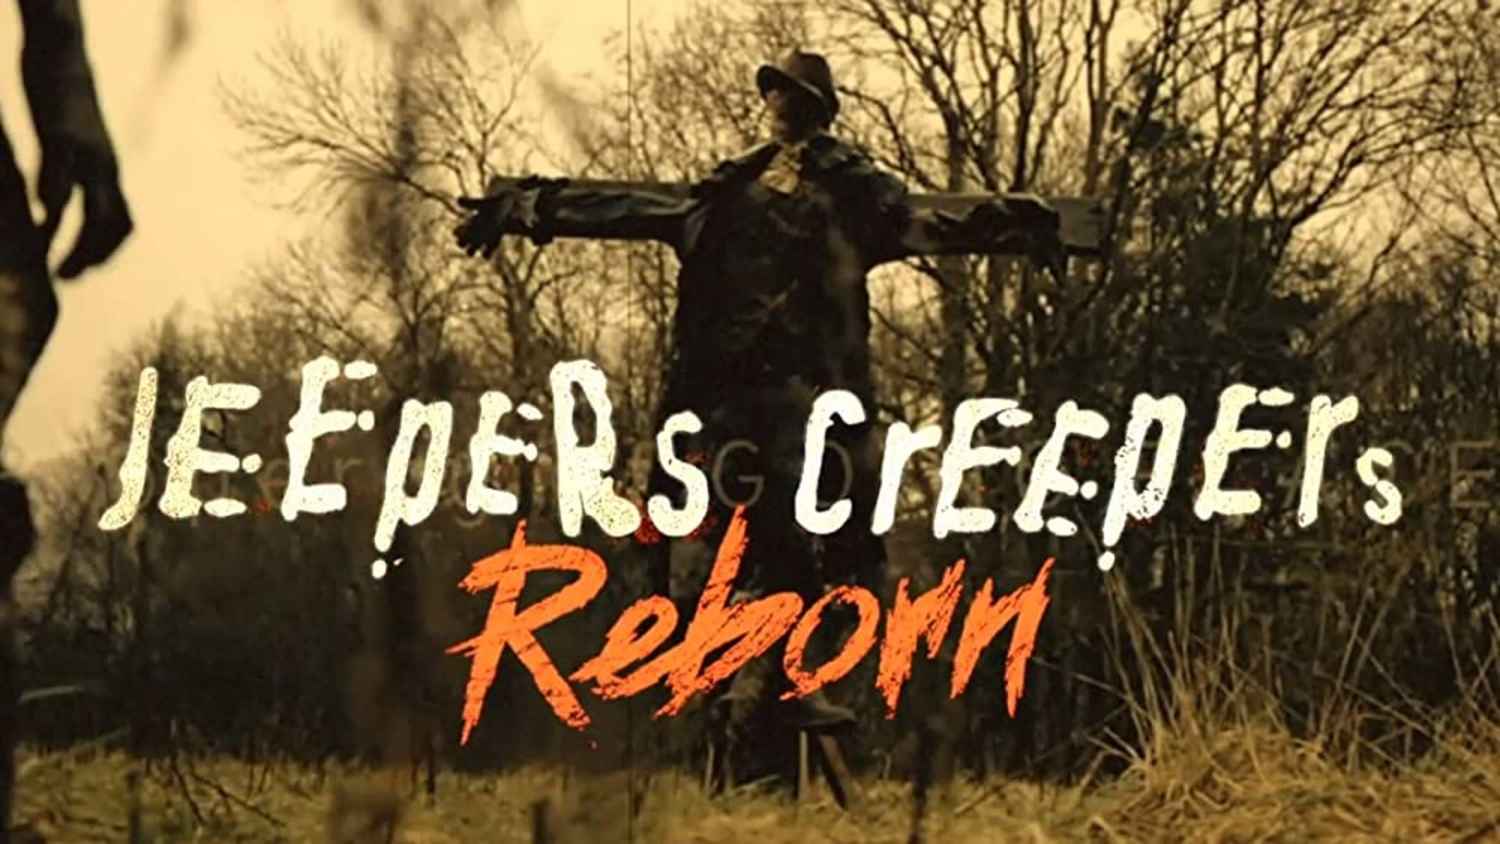 jeepers creepers free hd streaming